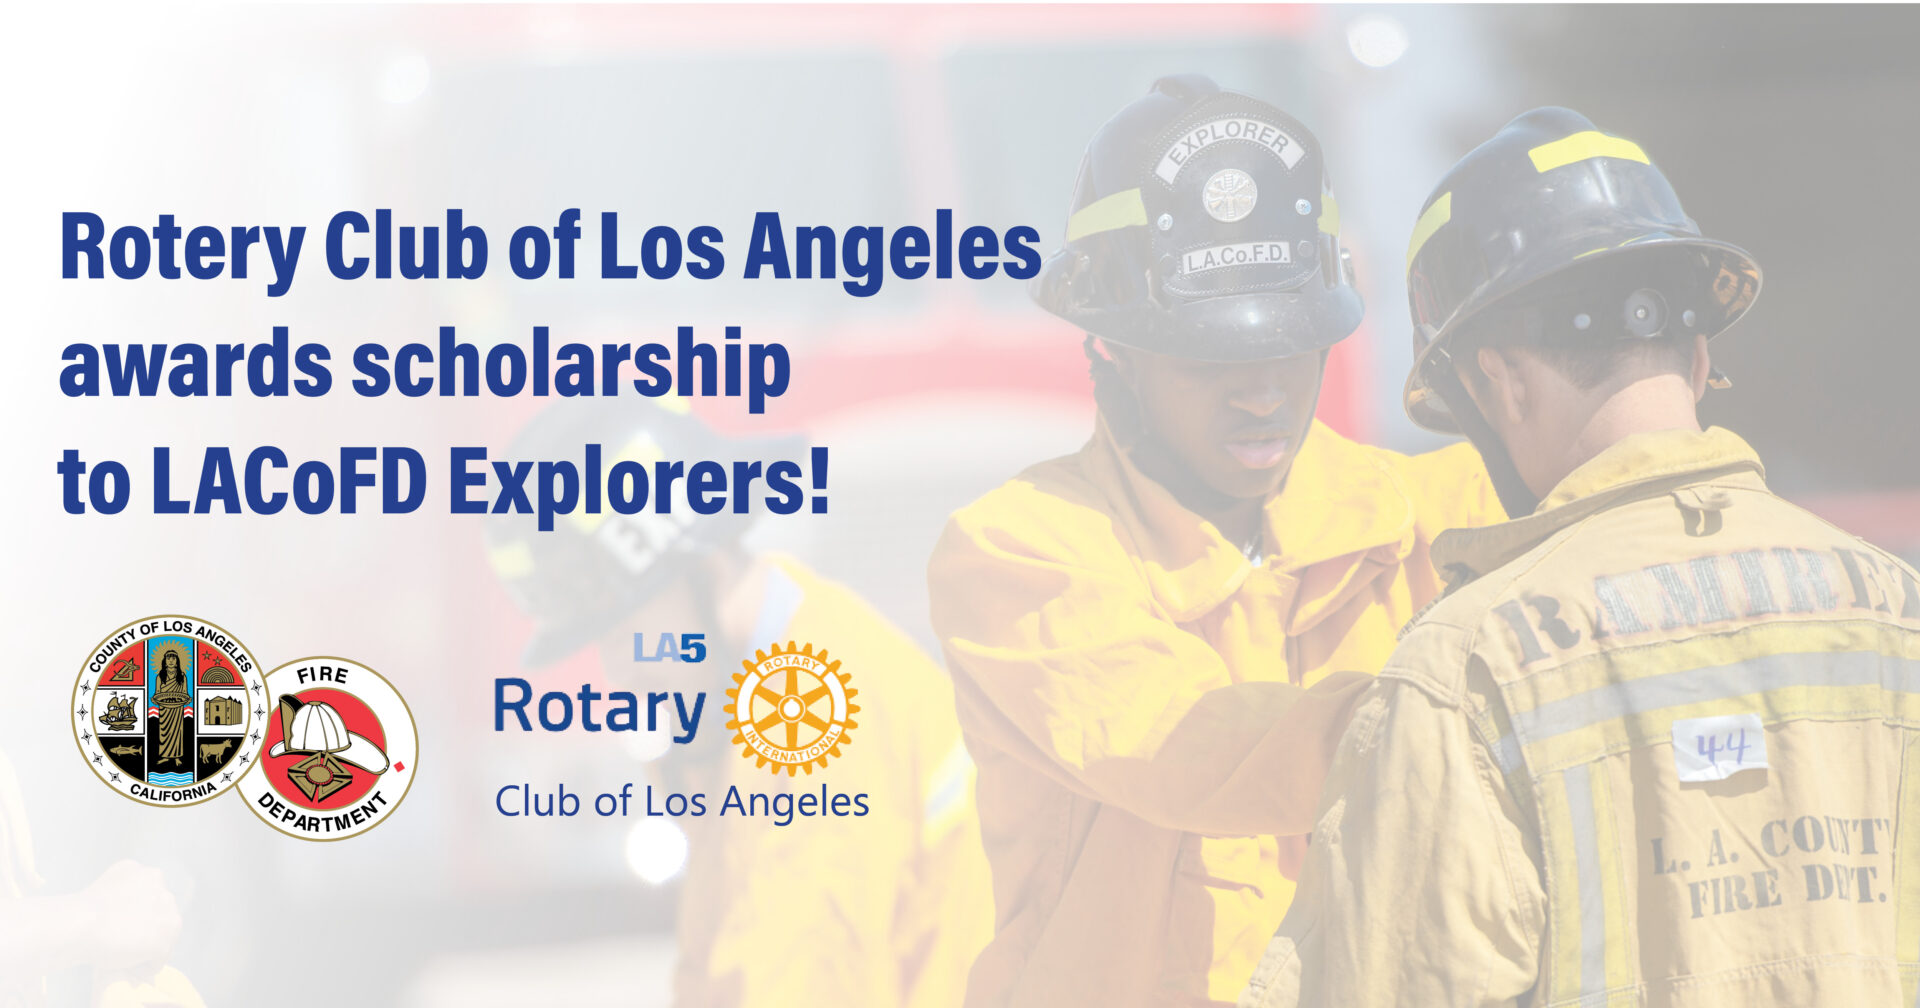 The County of Los Angeles Fire Department (LACoFD) is delighted to share the four Explorers below were recently awarded $1,000 scholarships through LARotary5 for their hard work and dedication to the Fire Explorer Program and serving the community.